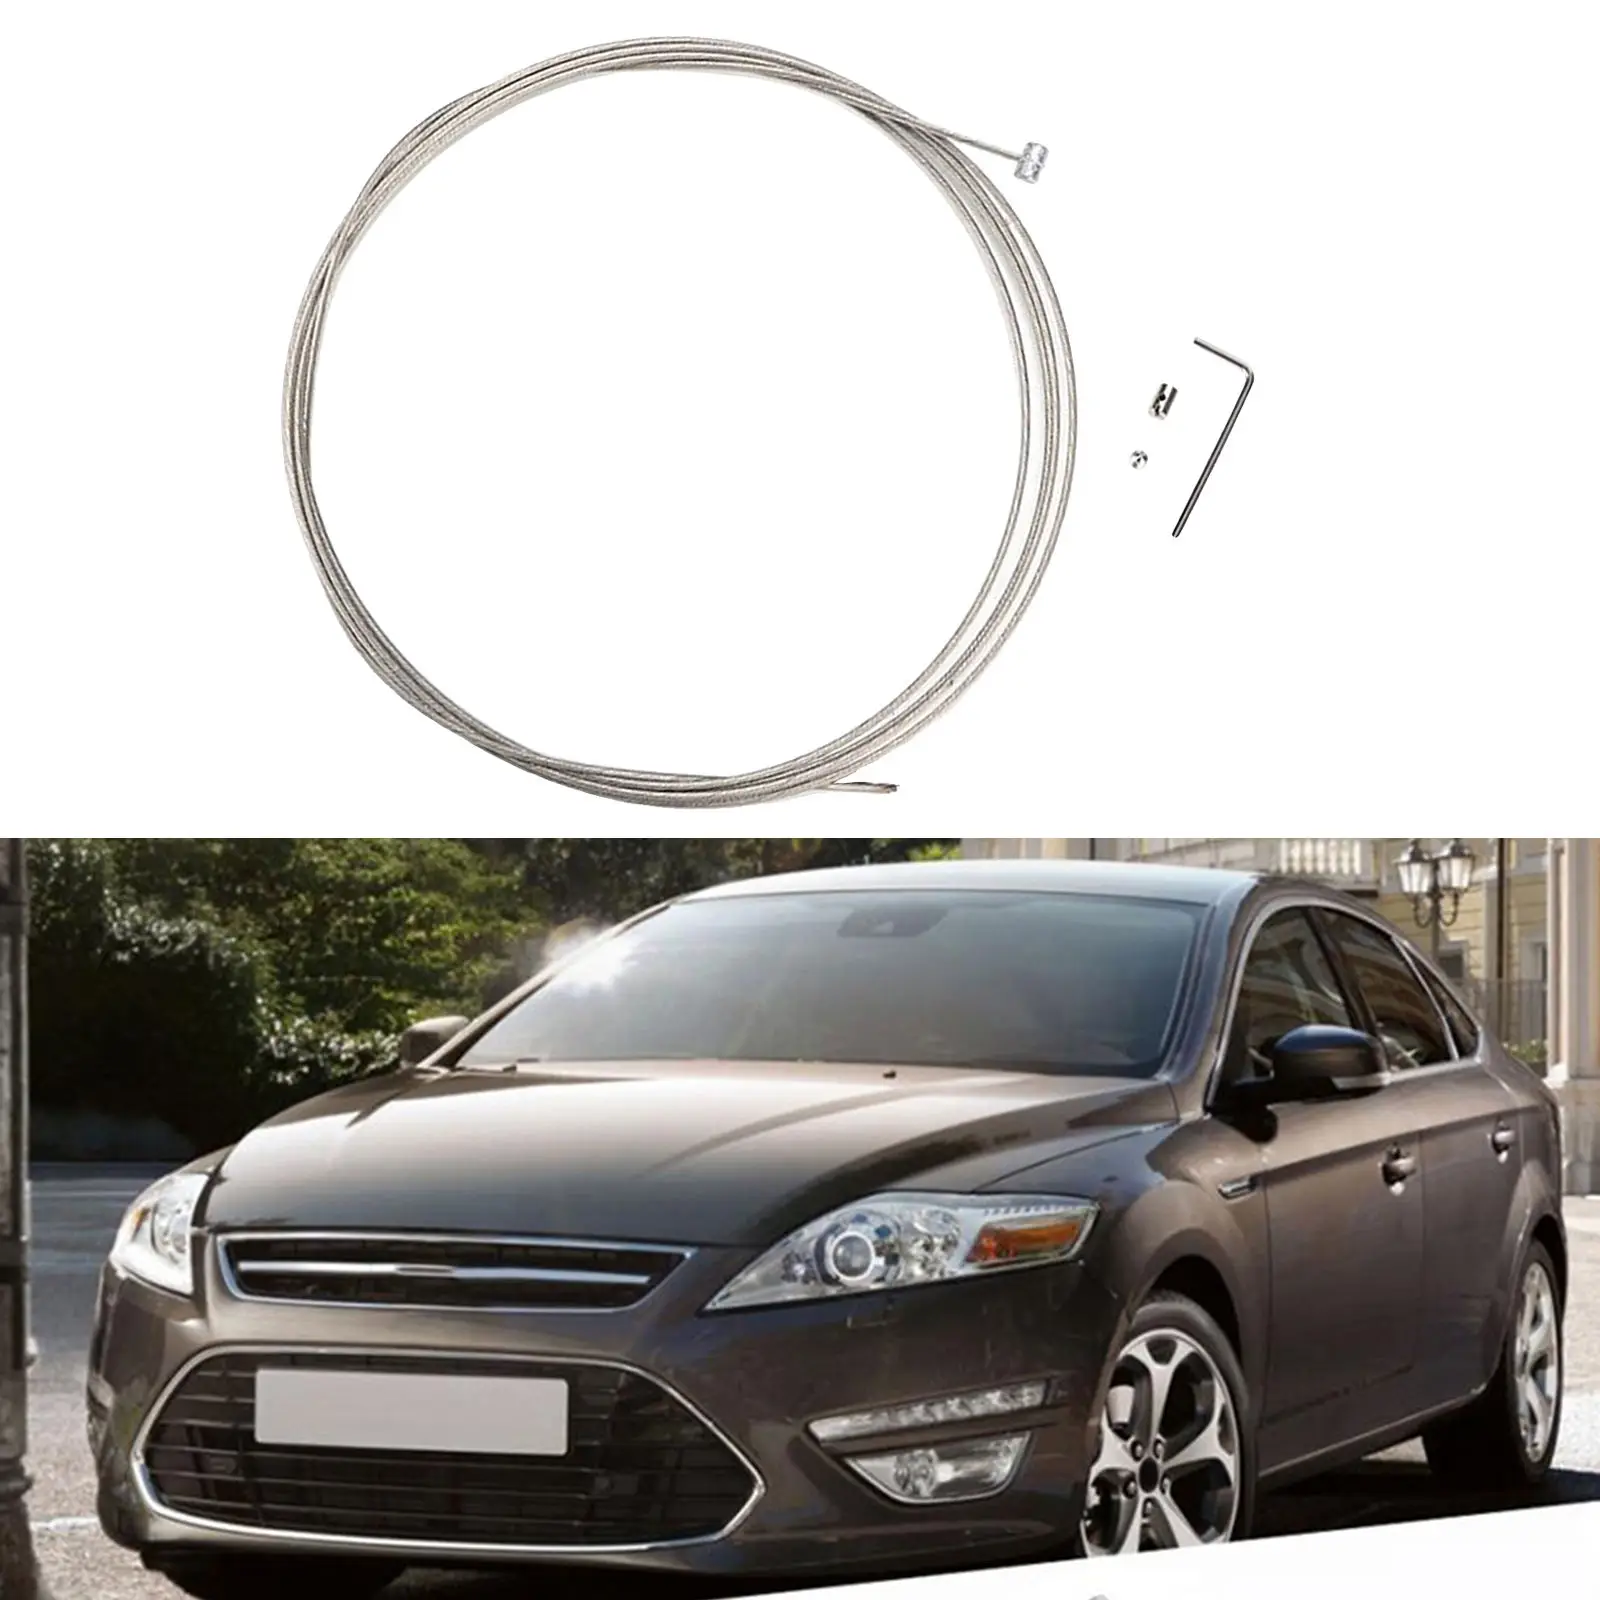 8.2ft Car Handbrake Replacement Broken Snapped Bonnet Release Cable Fix Repair Kit fits for Ford Mondeo MK4 2007-2021